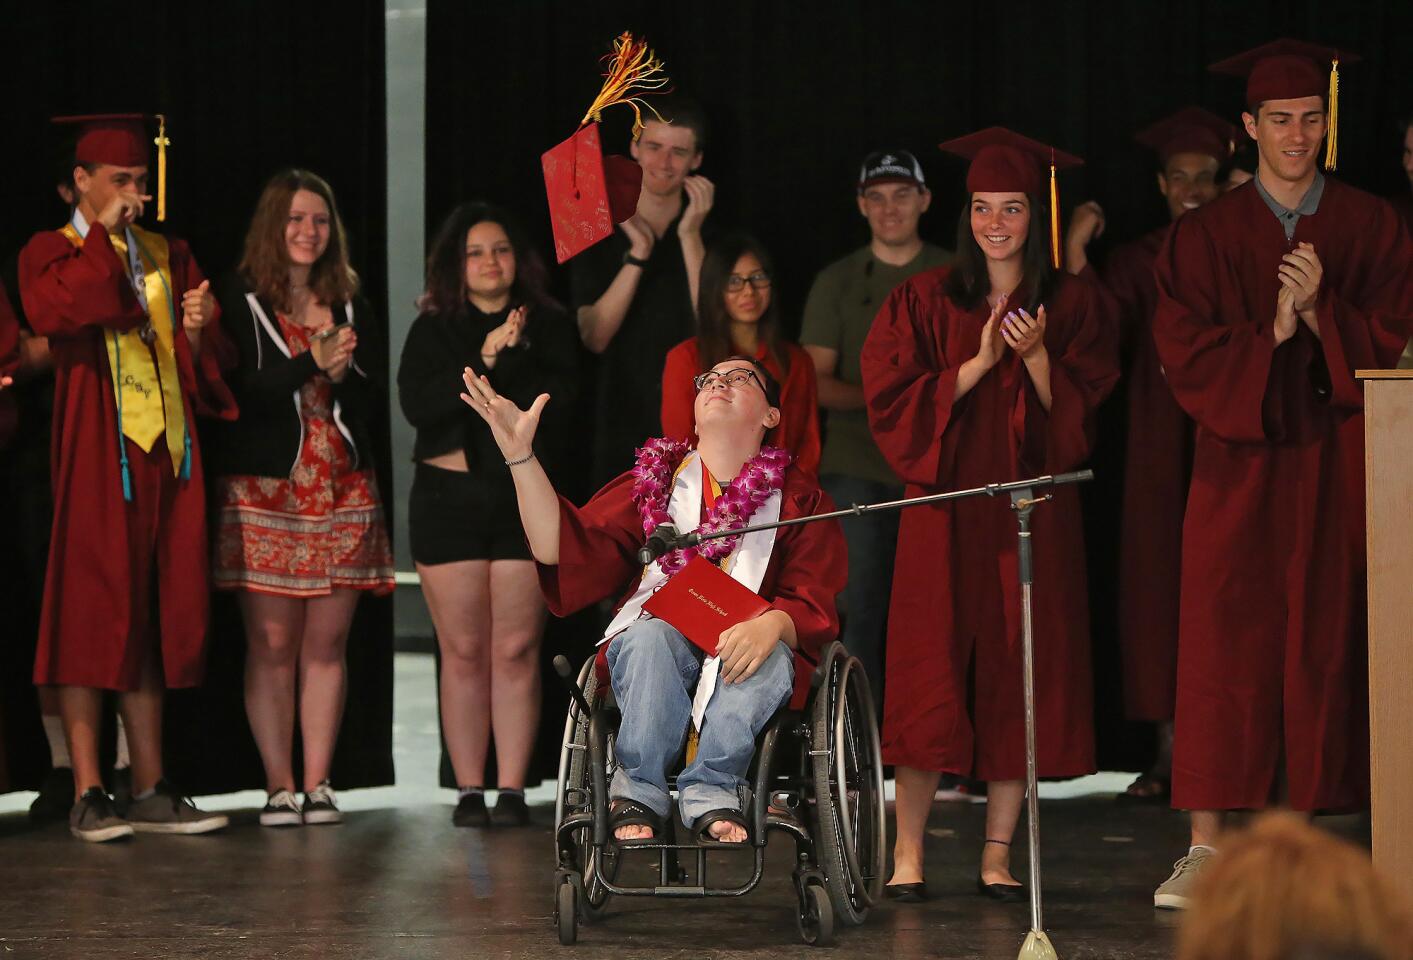 Max Nelson throws his cap in the air as he is announced officially graduated from Ocean View High School during a special ceremony Friday. Nelson missed the scheduled graduation June 12 because of a fall that sent him to a hospital an hour before the ceremony. Friday's proceedings included speakers, recent graduates, school board members, friends, relatives and administrators.